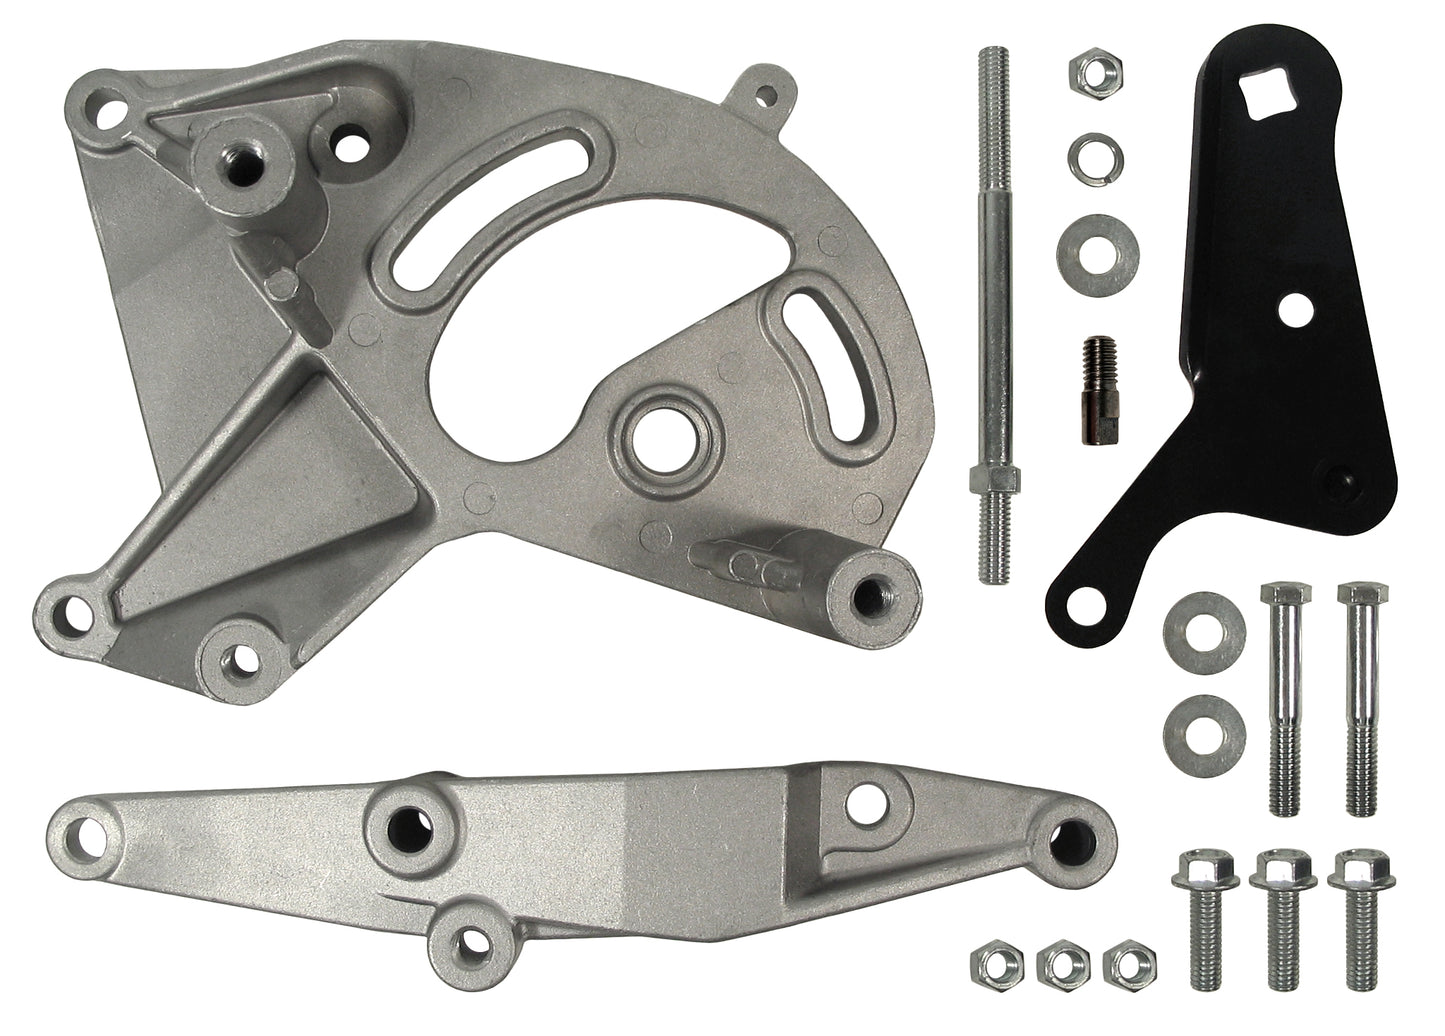 JEEP POWER STEERING KIT,BOX,PUMP,SHAFT,V8 BRACKET,72-75,DOUBLE PULLEY FOR A/C